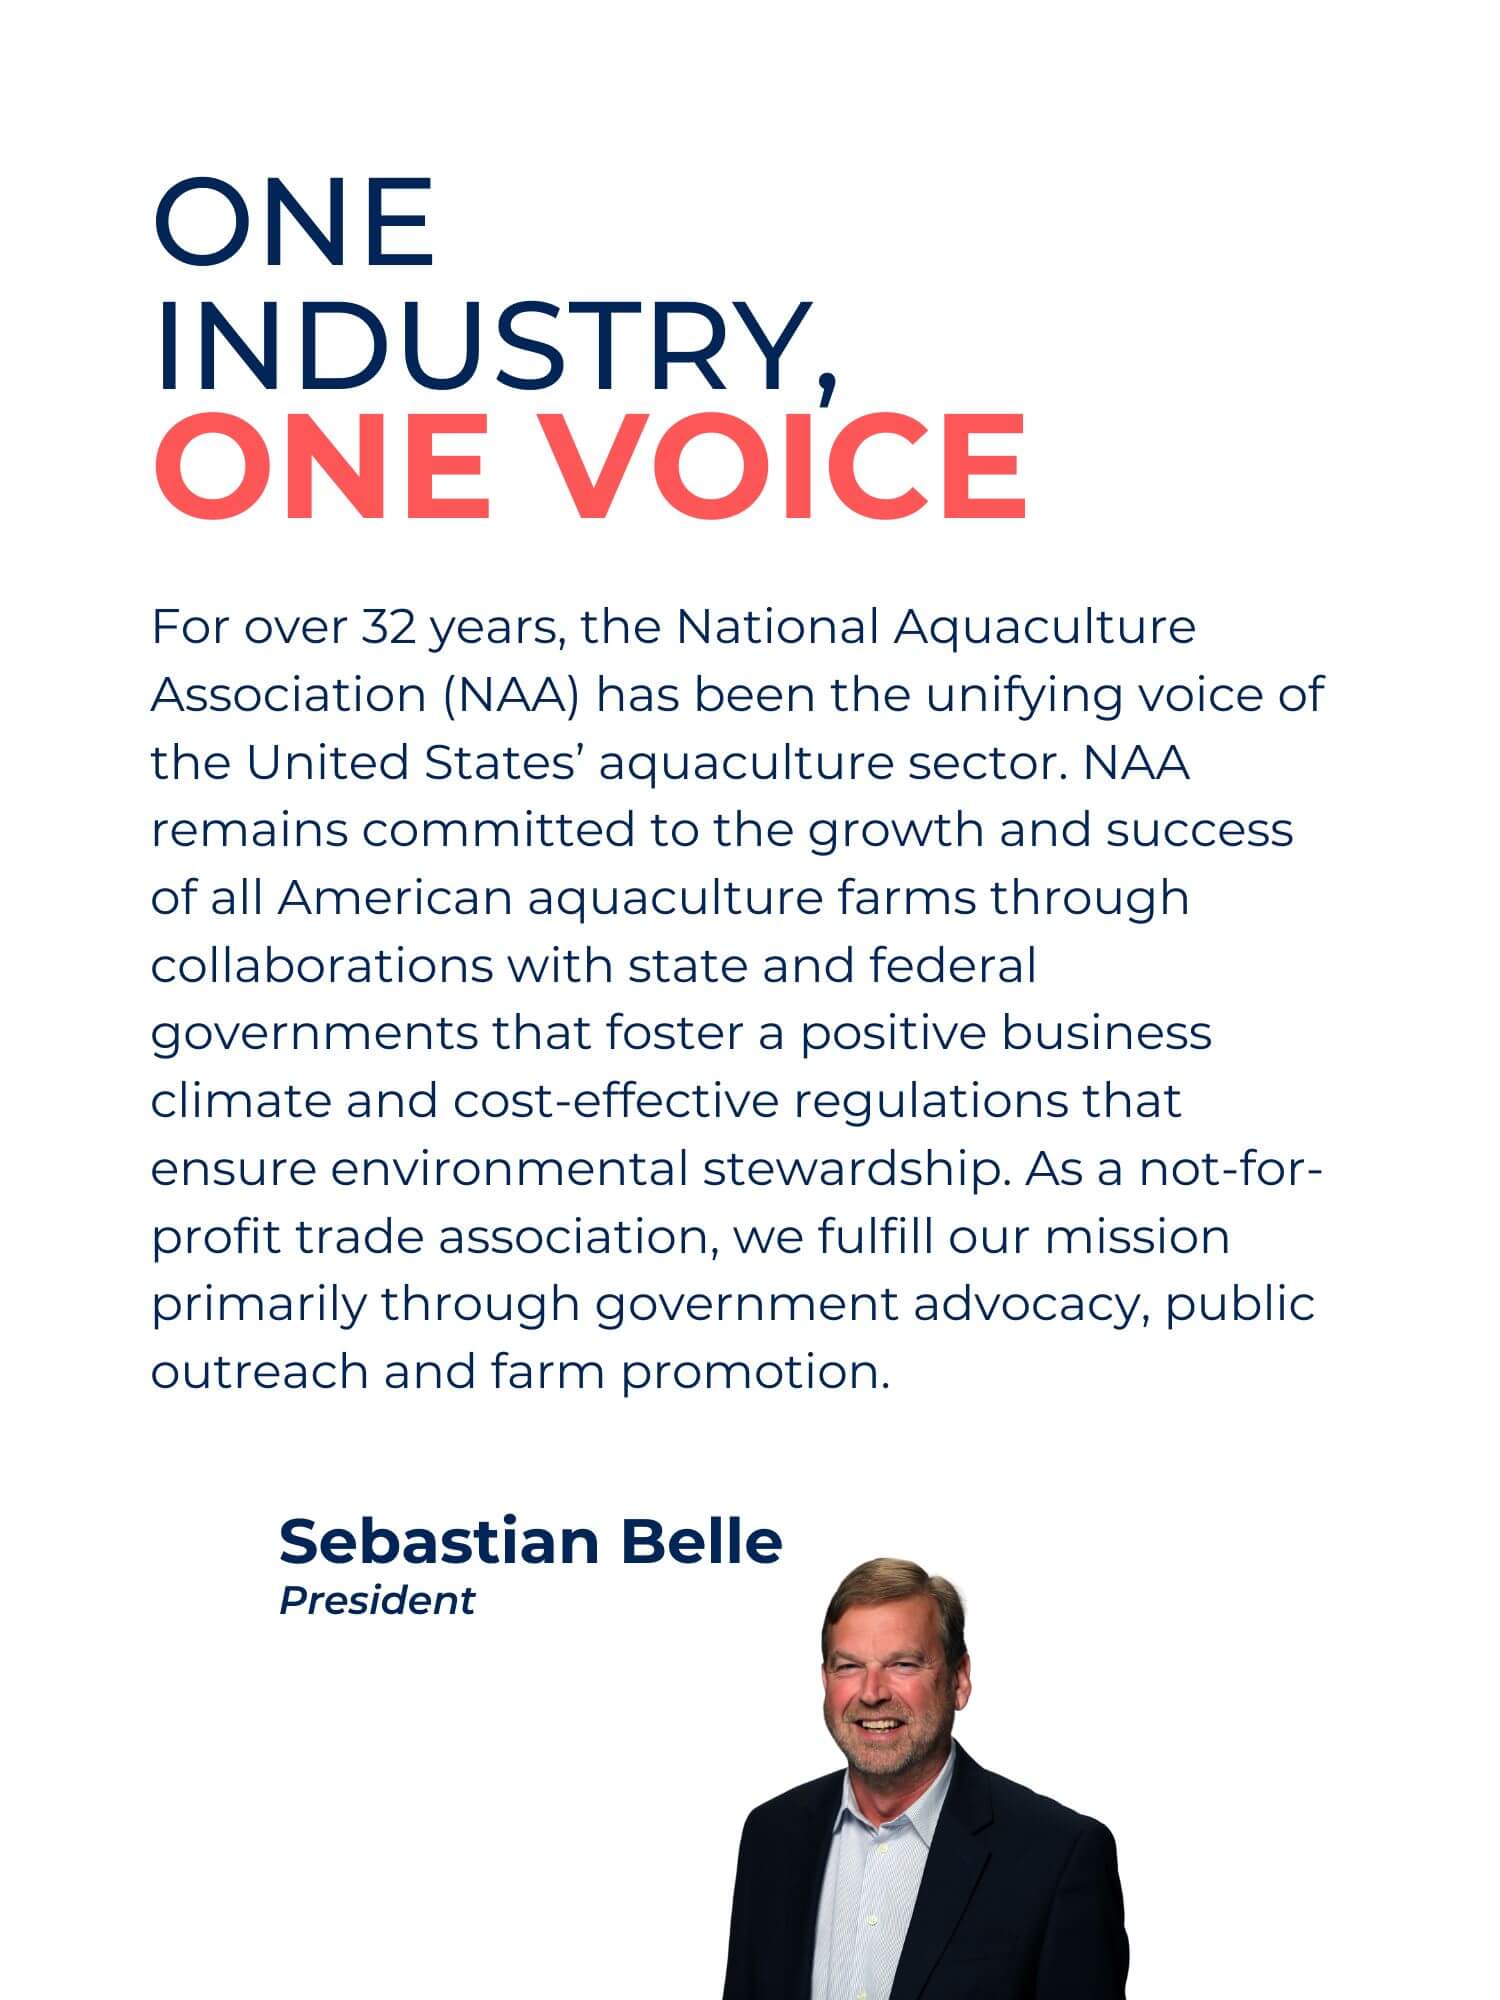 One industry, one voice